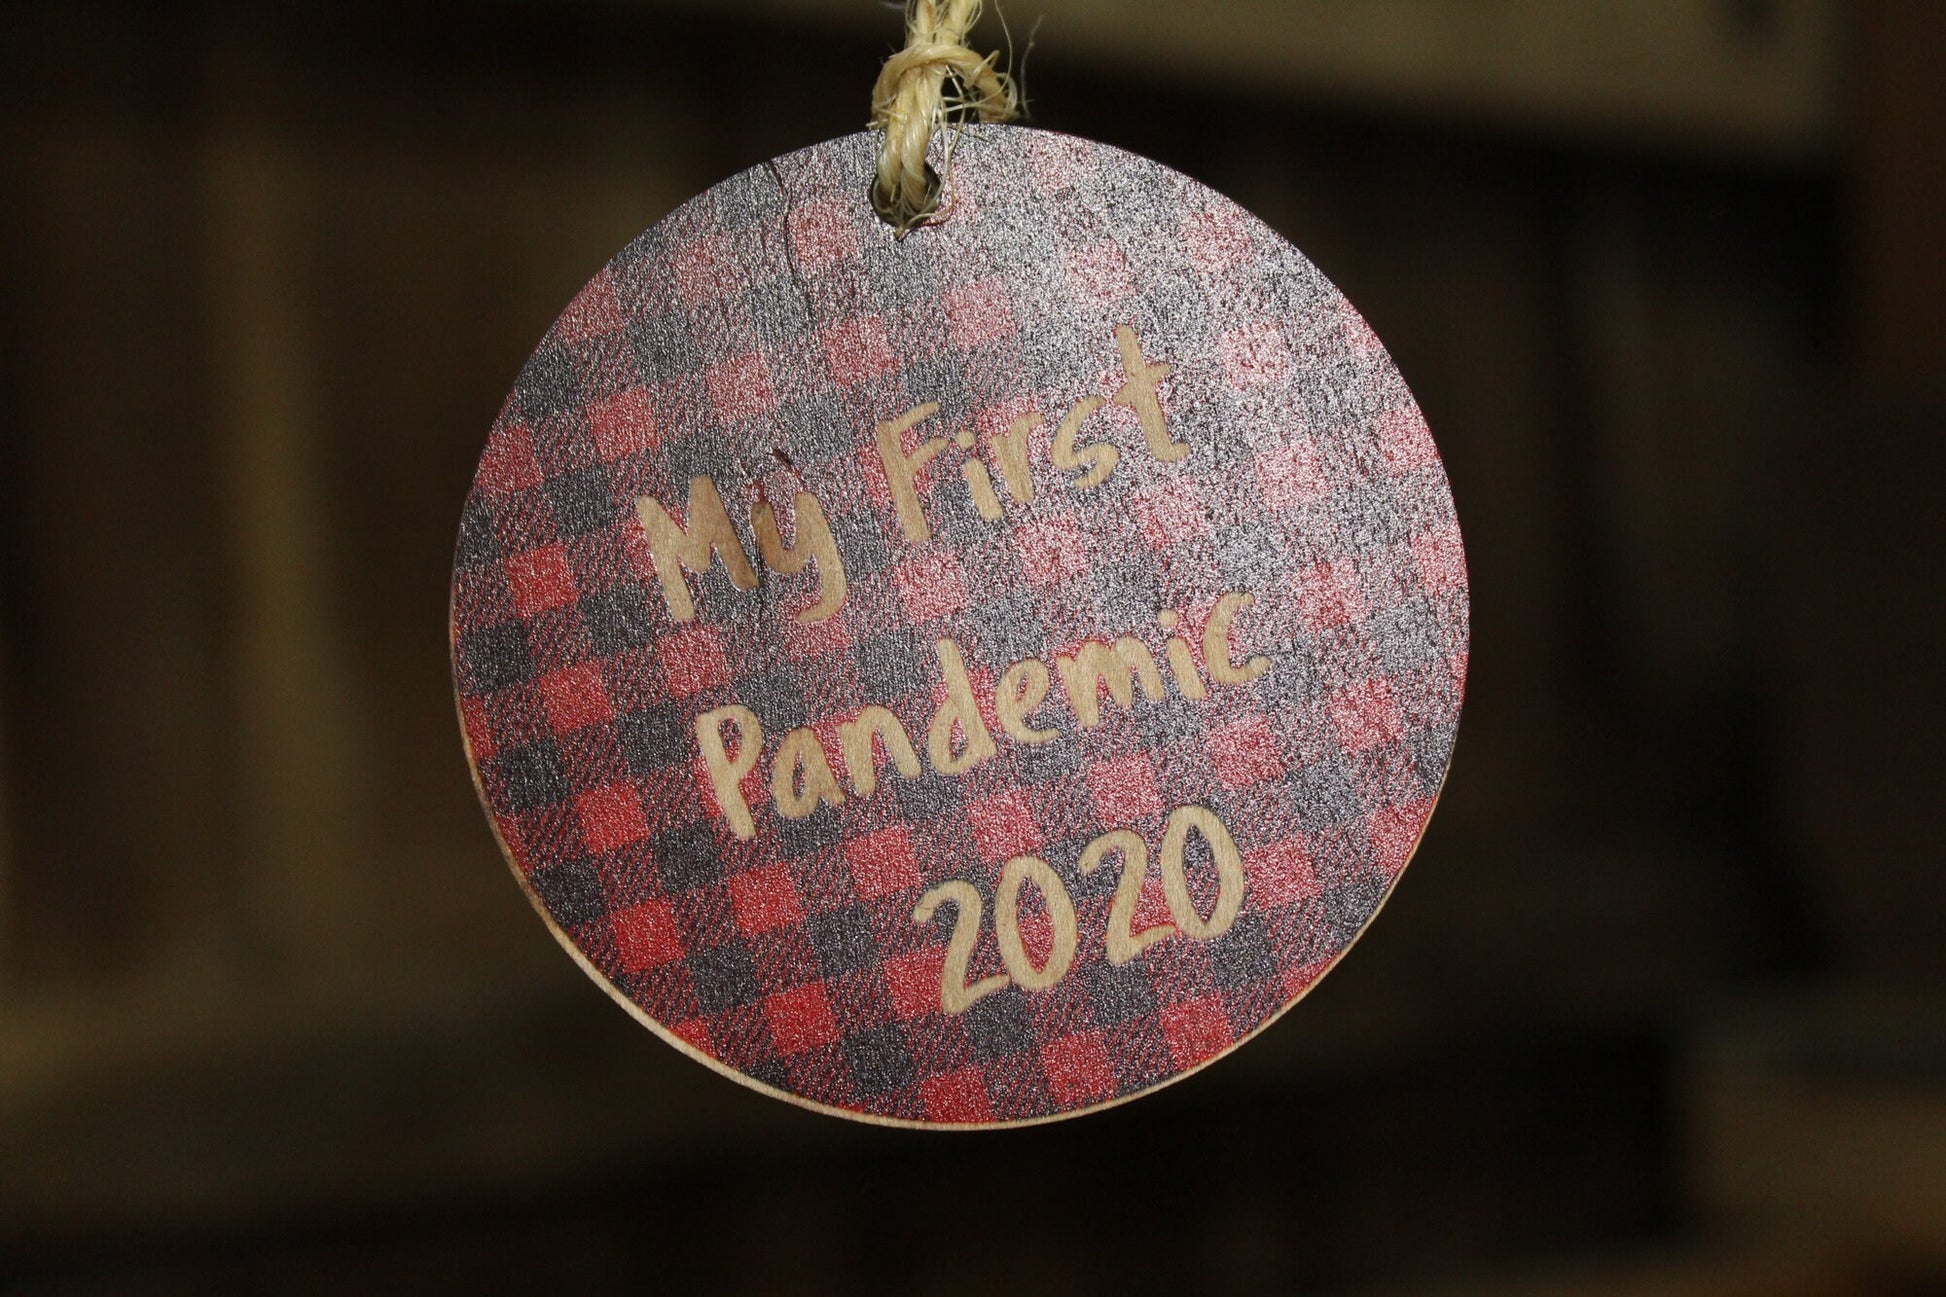 My First Pandemic 2020 Ornament Wood Slice Red Buffalo Plaid Christmas Tree Primitive Rustic Tree Printed Silly Covid